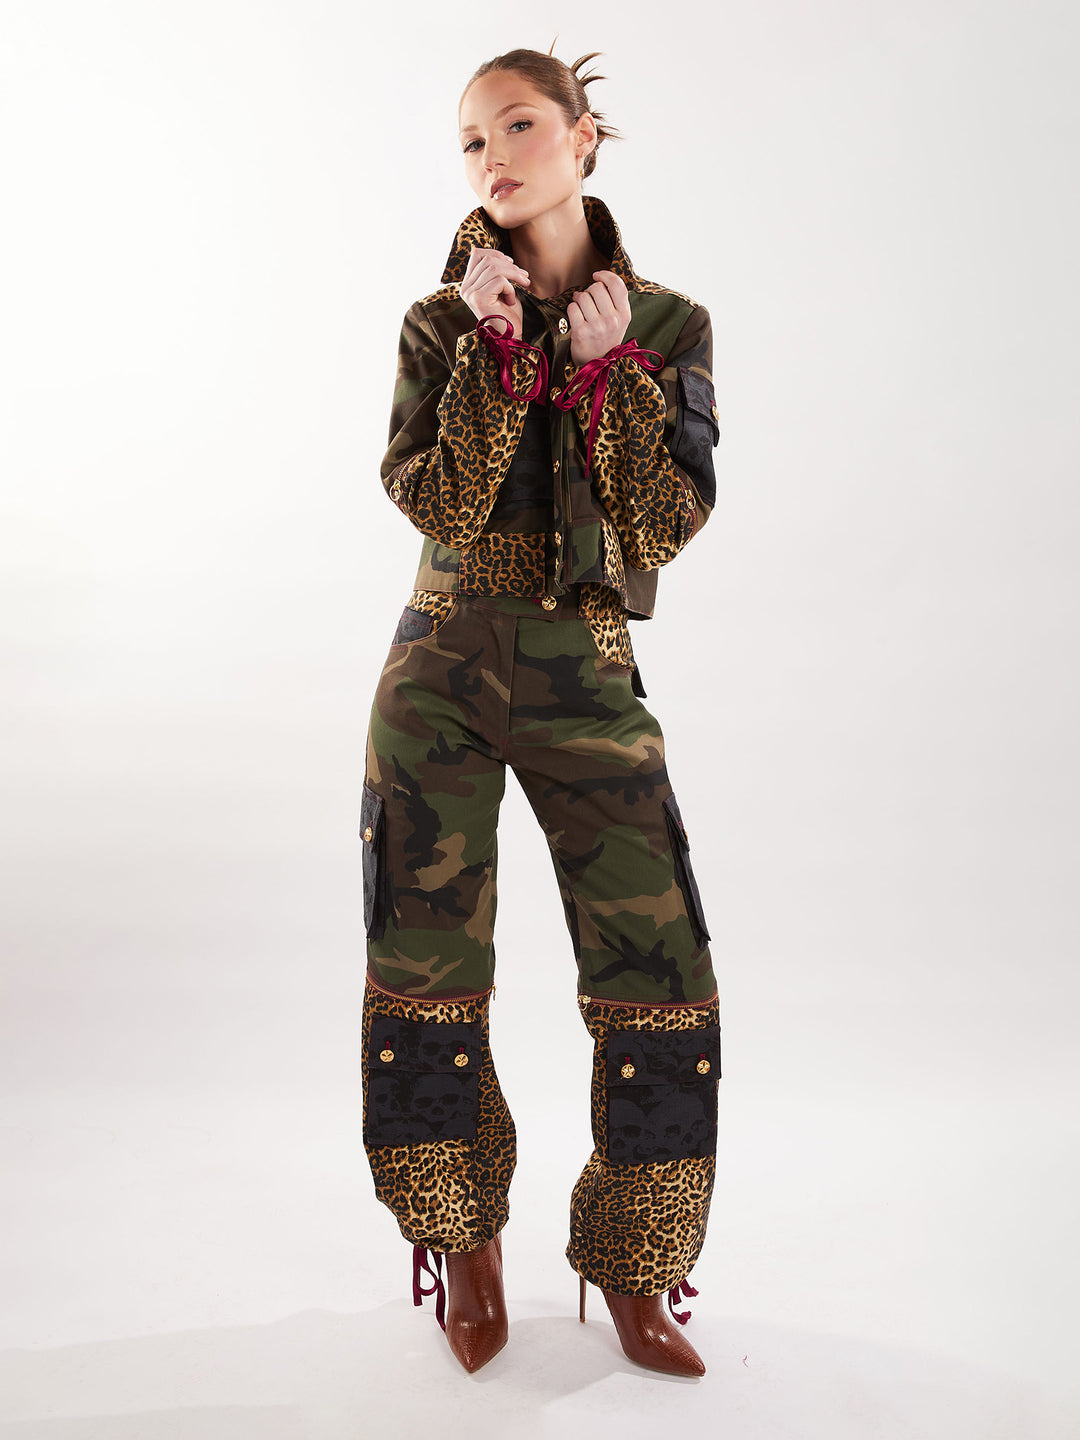 Camo and leopard cargo outfit women’s